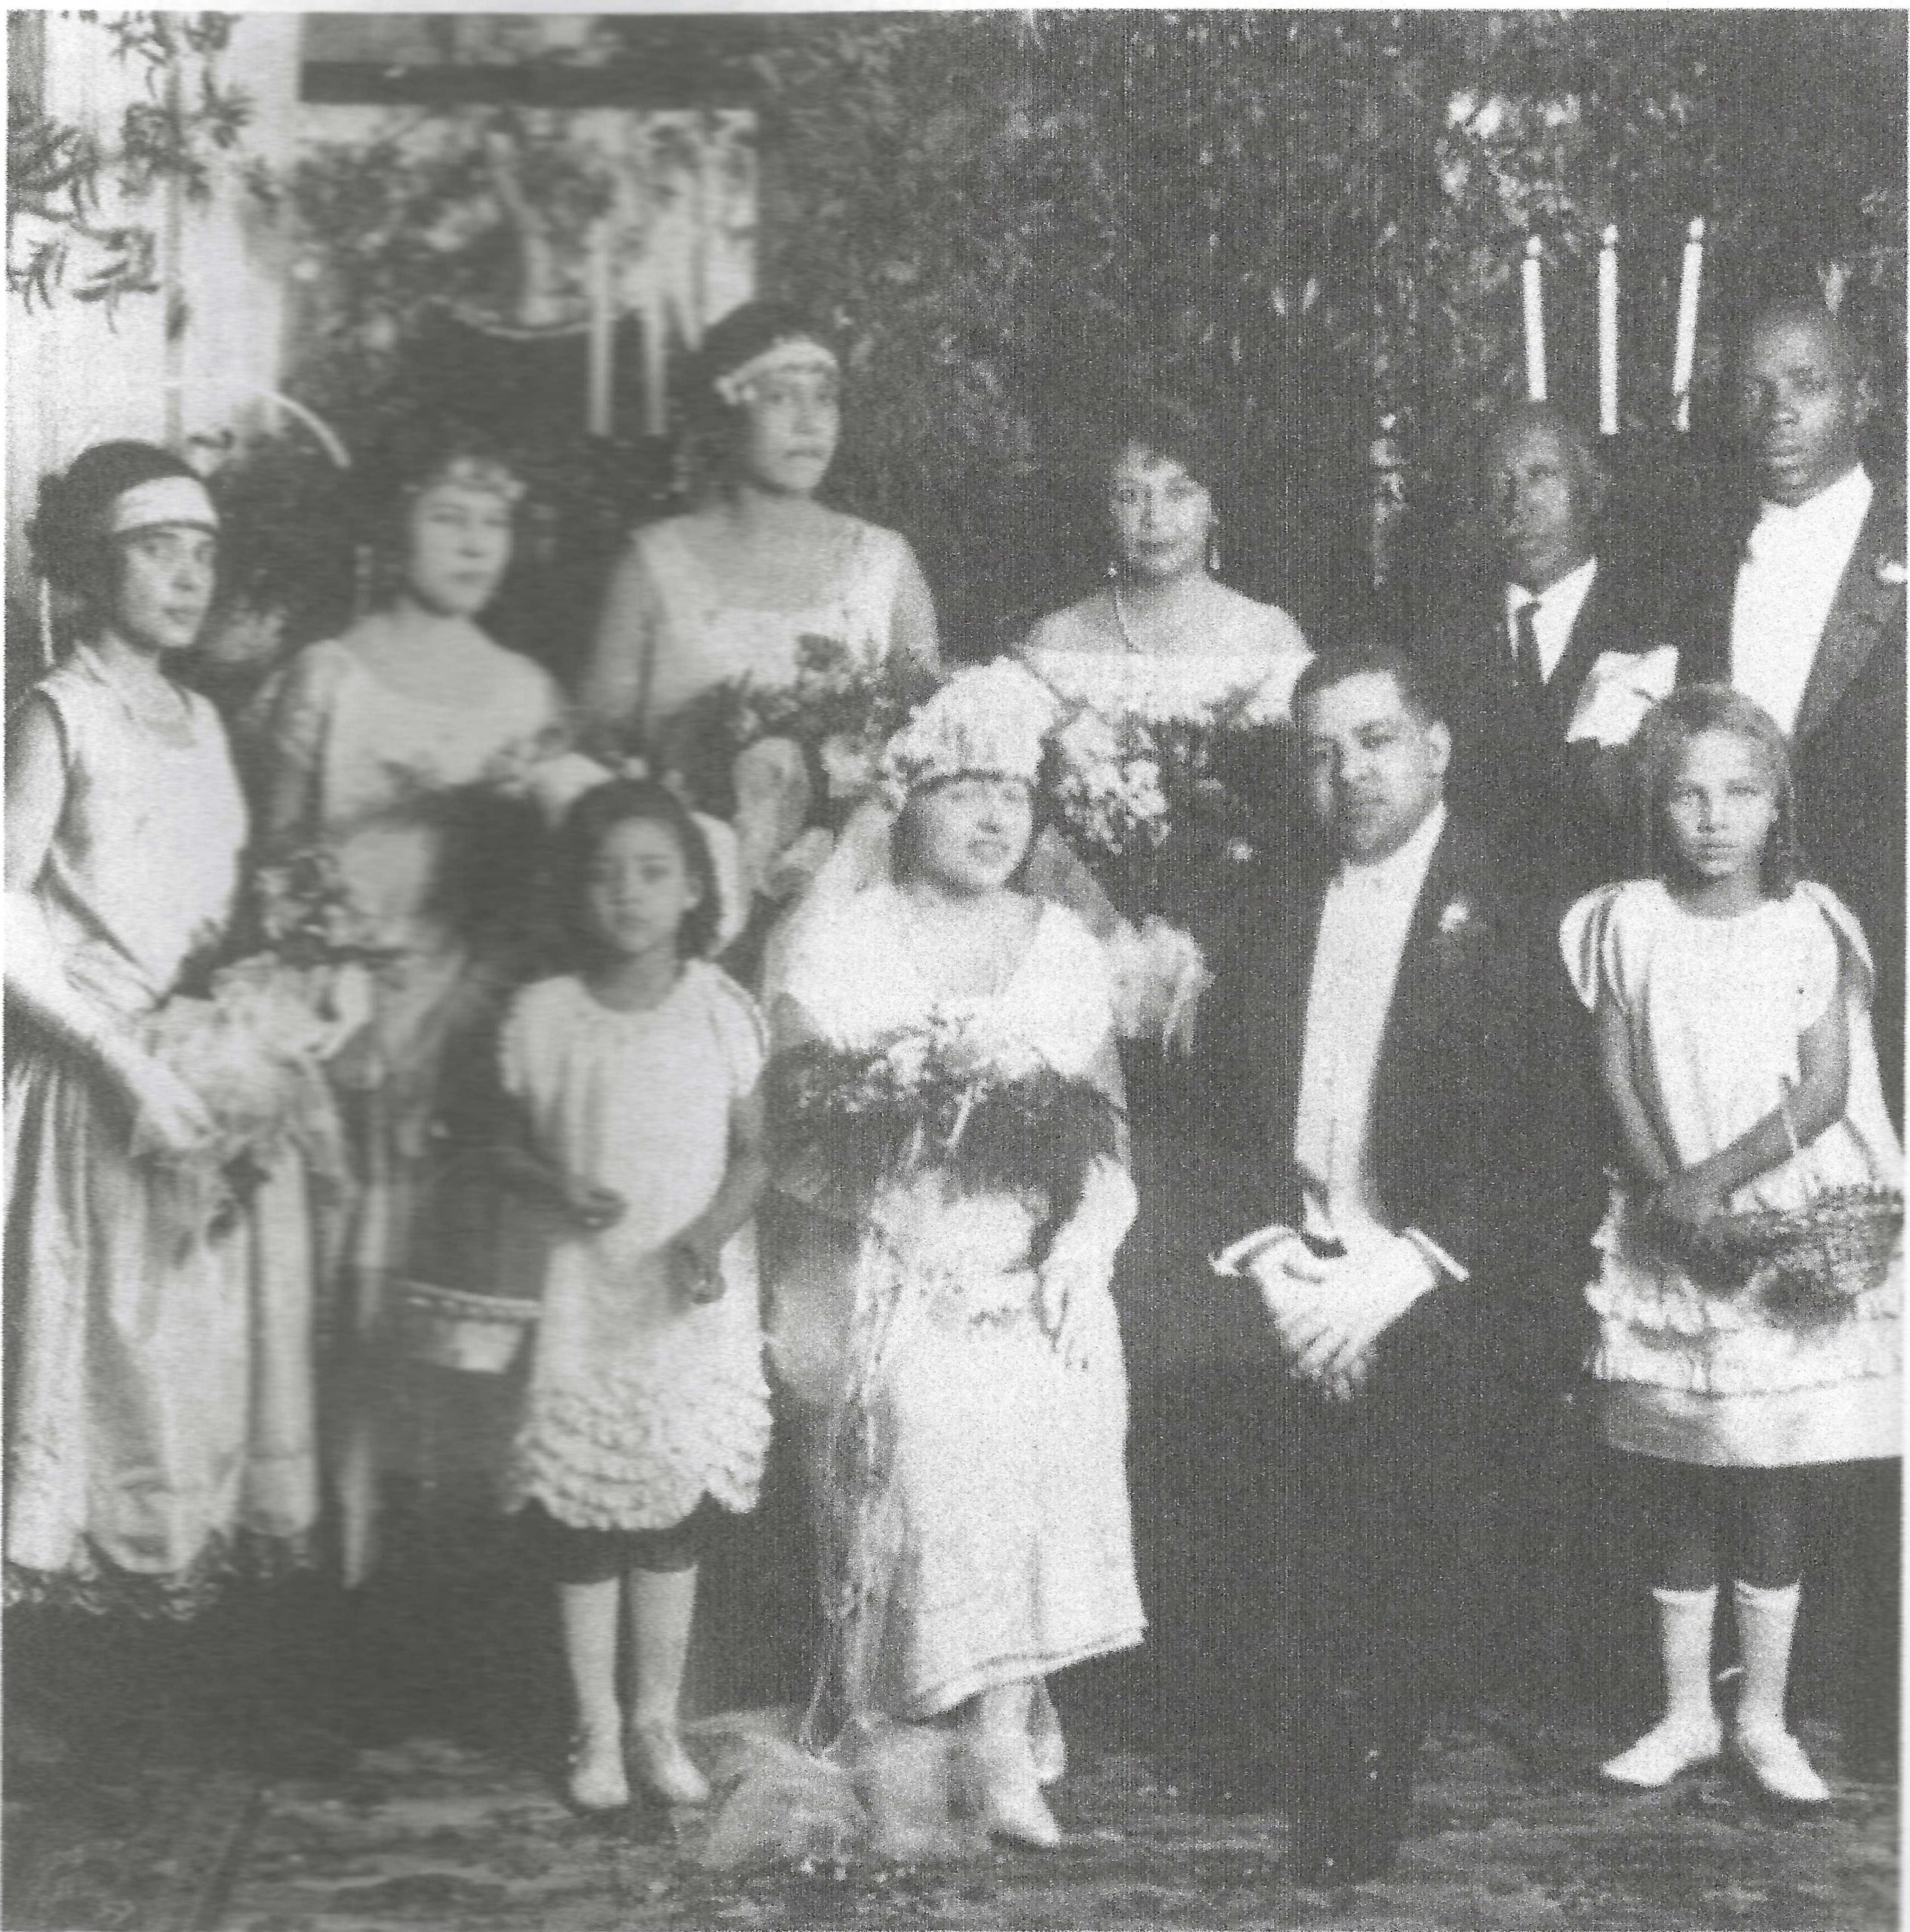 “The wedding of Dr. Carrie Jane Sutton and Dr. John Hunter Brooks at 430 N. Cherry in San Antonio was one of the highlights of the social season in 1924.” (Winegarten, p122)